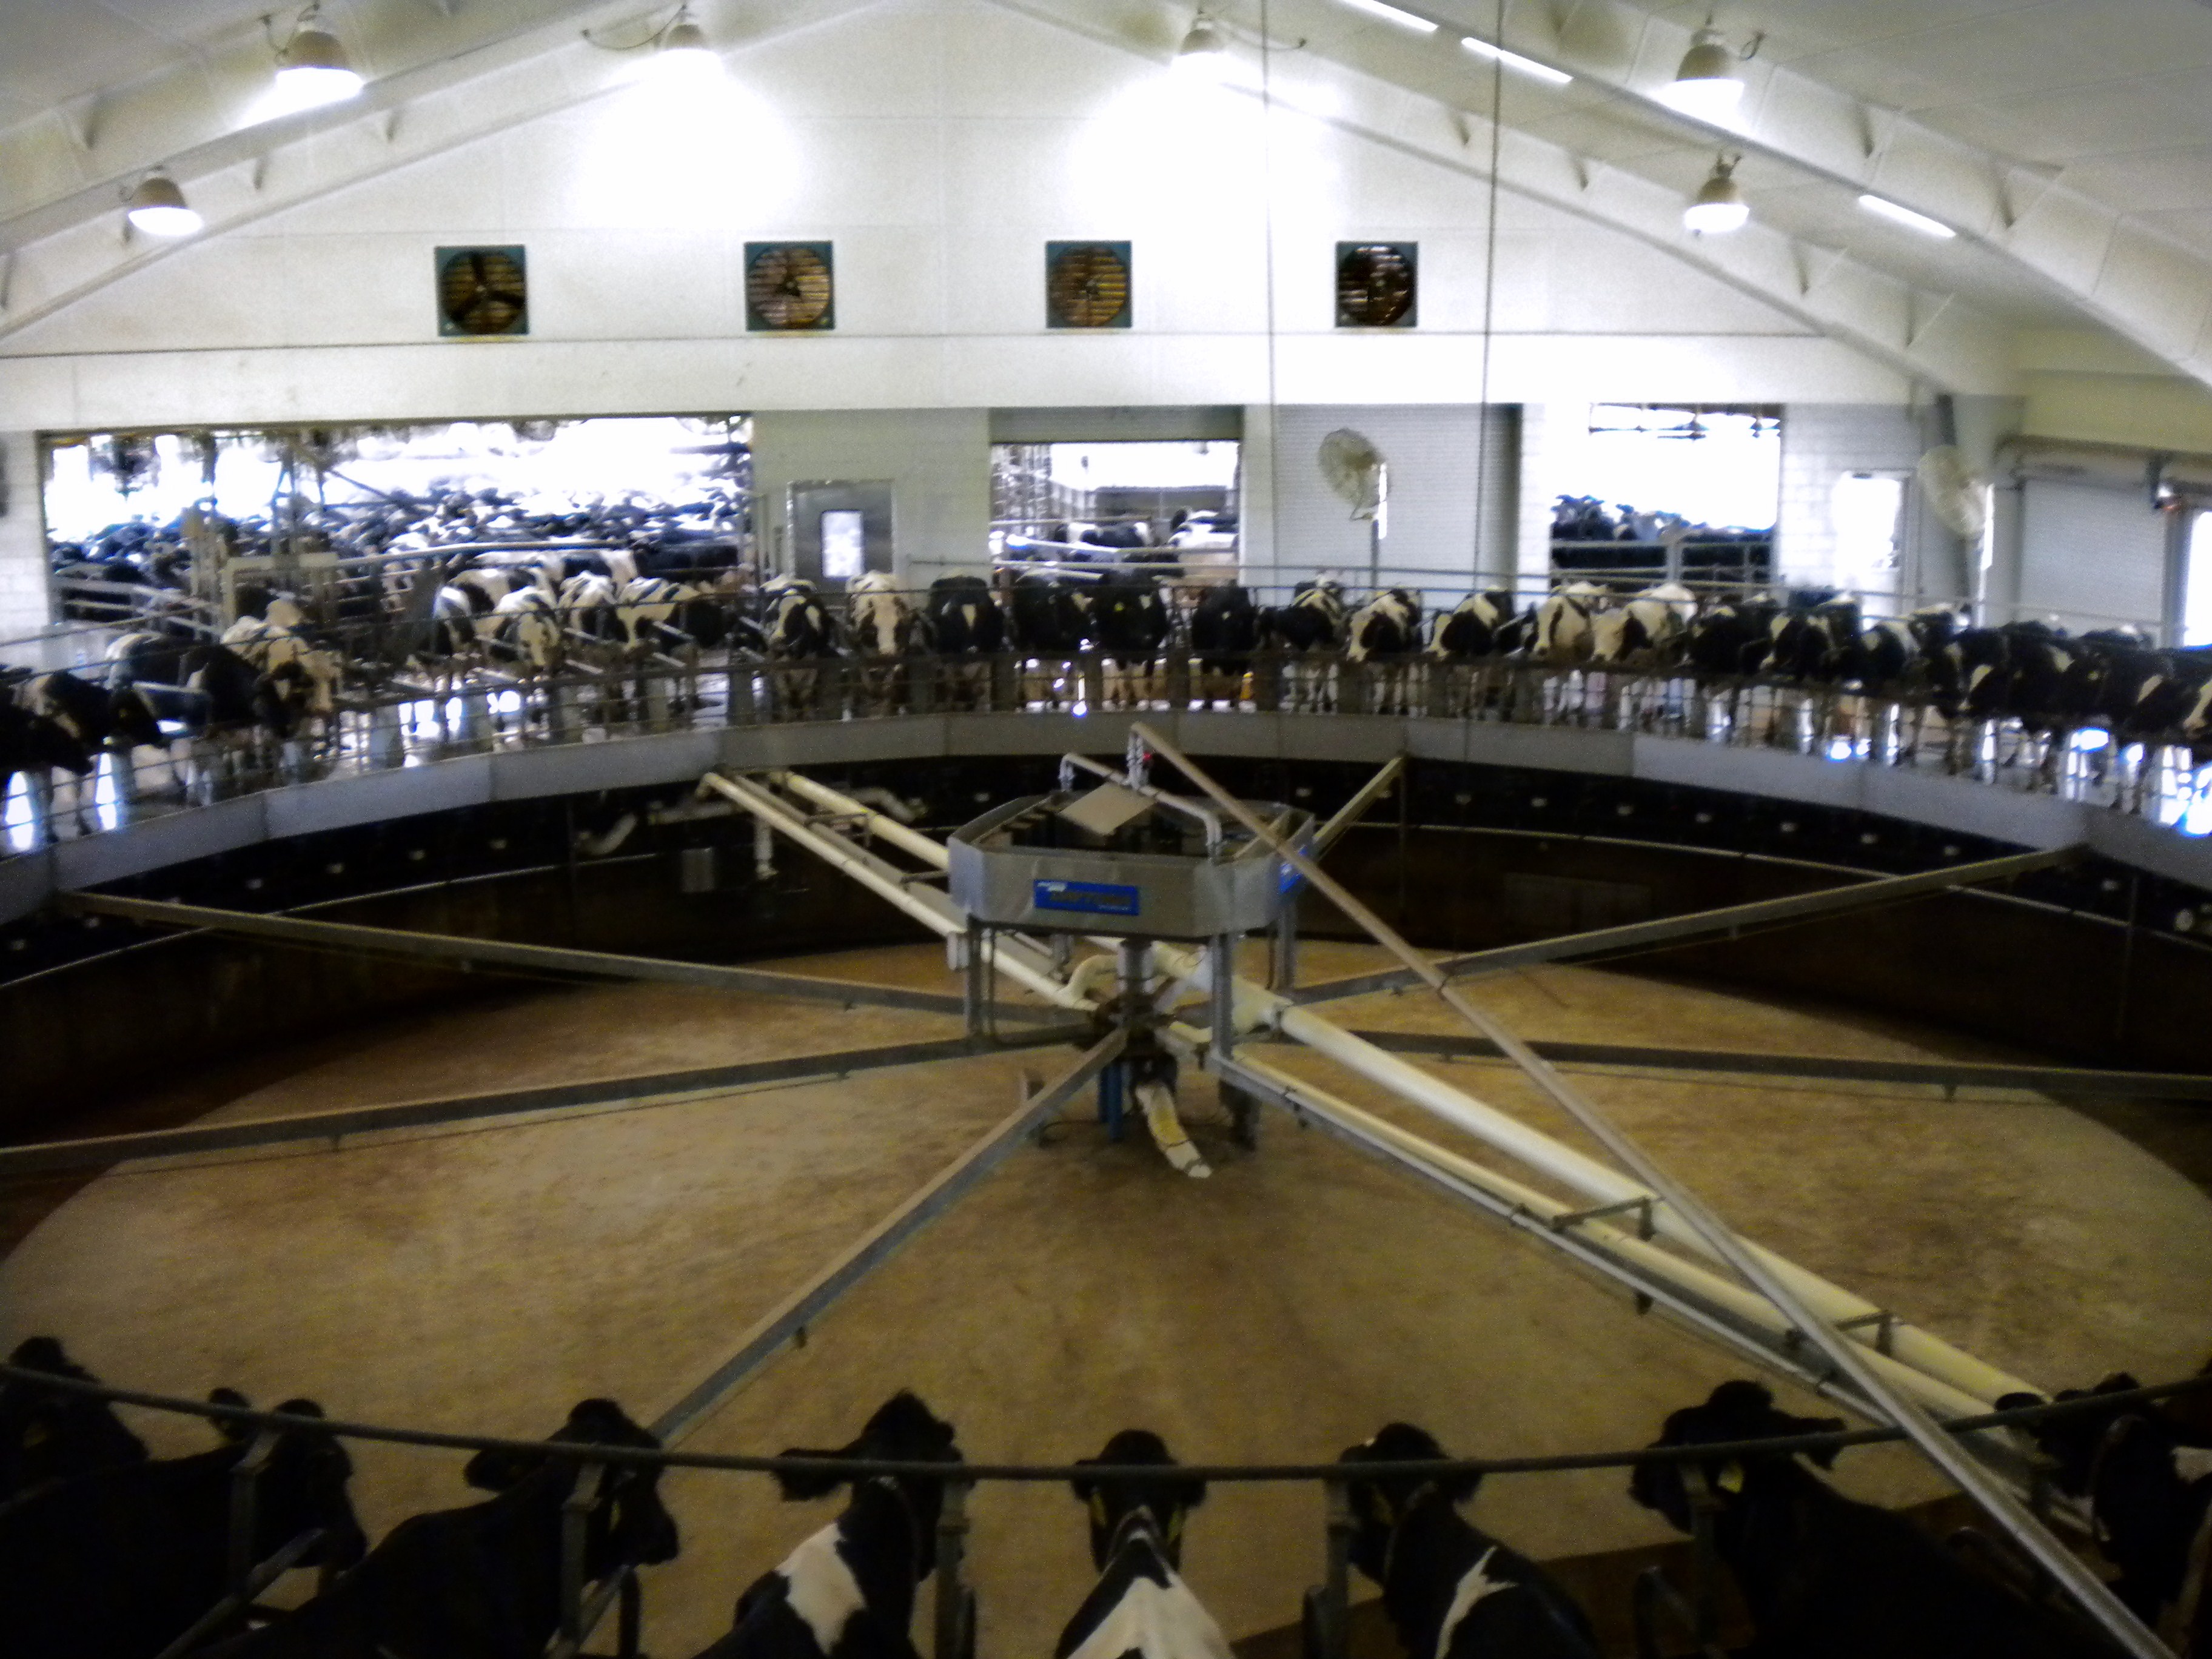 A Tale of Two Dairy Farms (One of Which Milks 30,000 Cows)